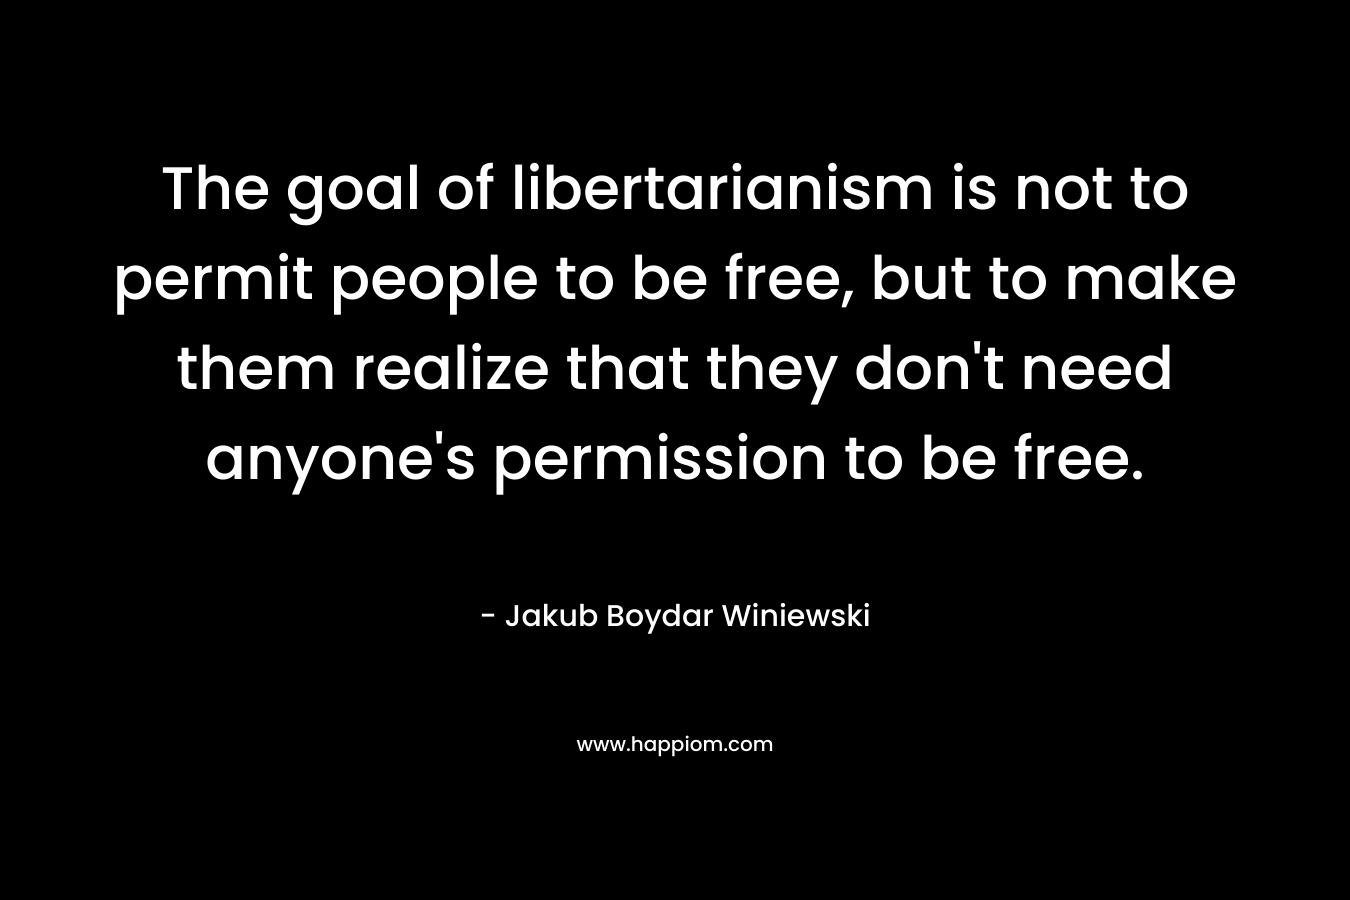 The goal of libertarianism is not to permit people to be free, but to make them realize that they don’t need anyone’s permission to be free. – Jakub Boydar Winiewski